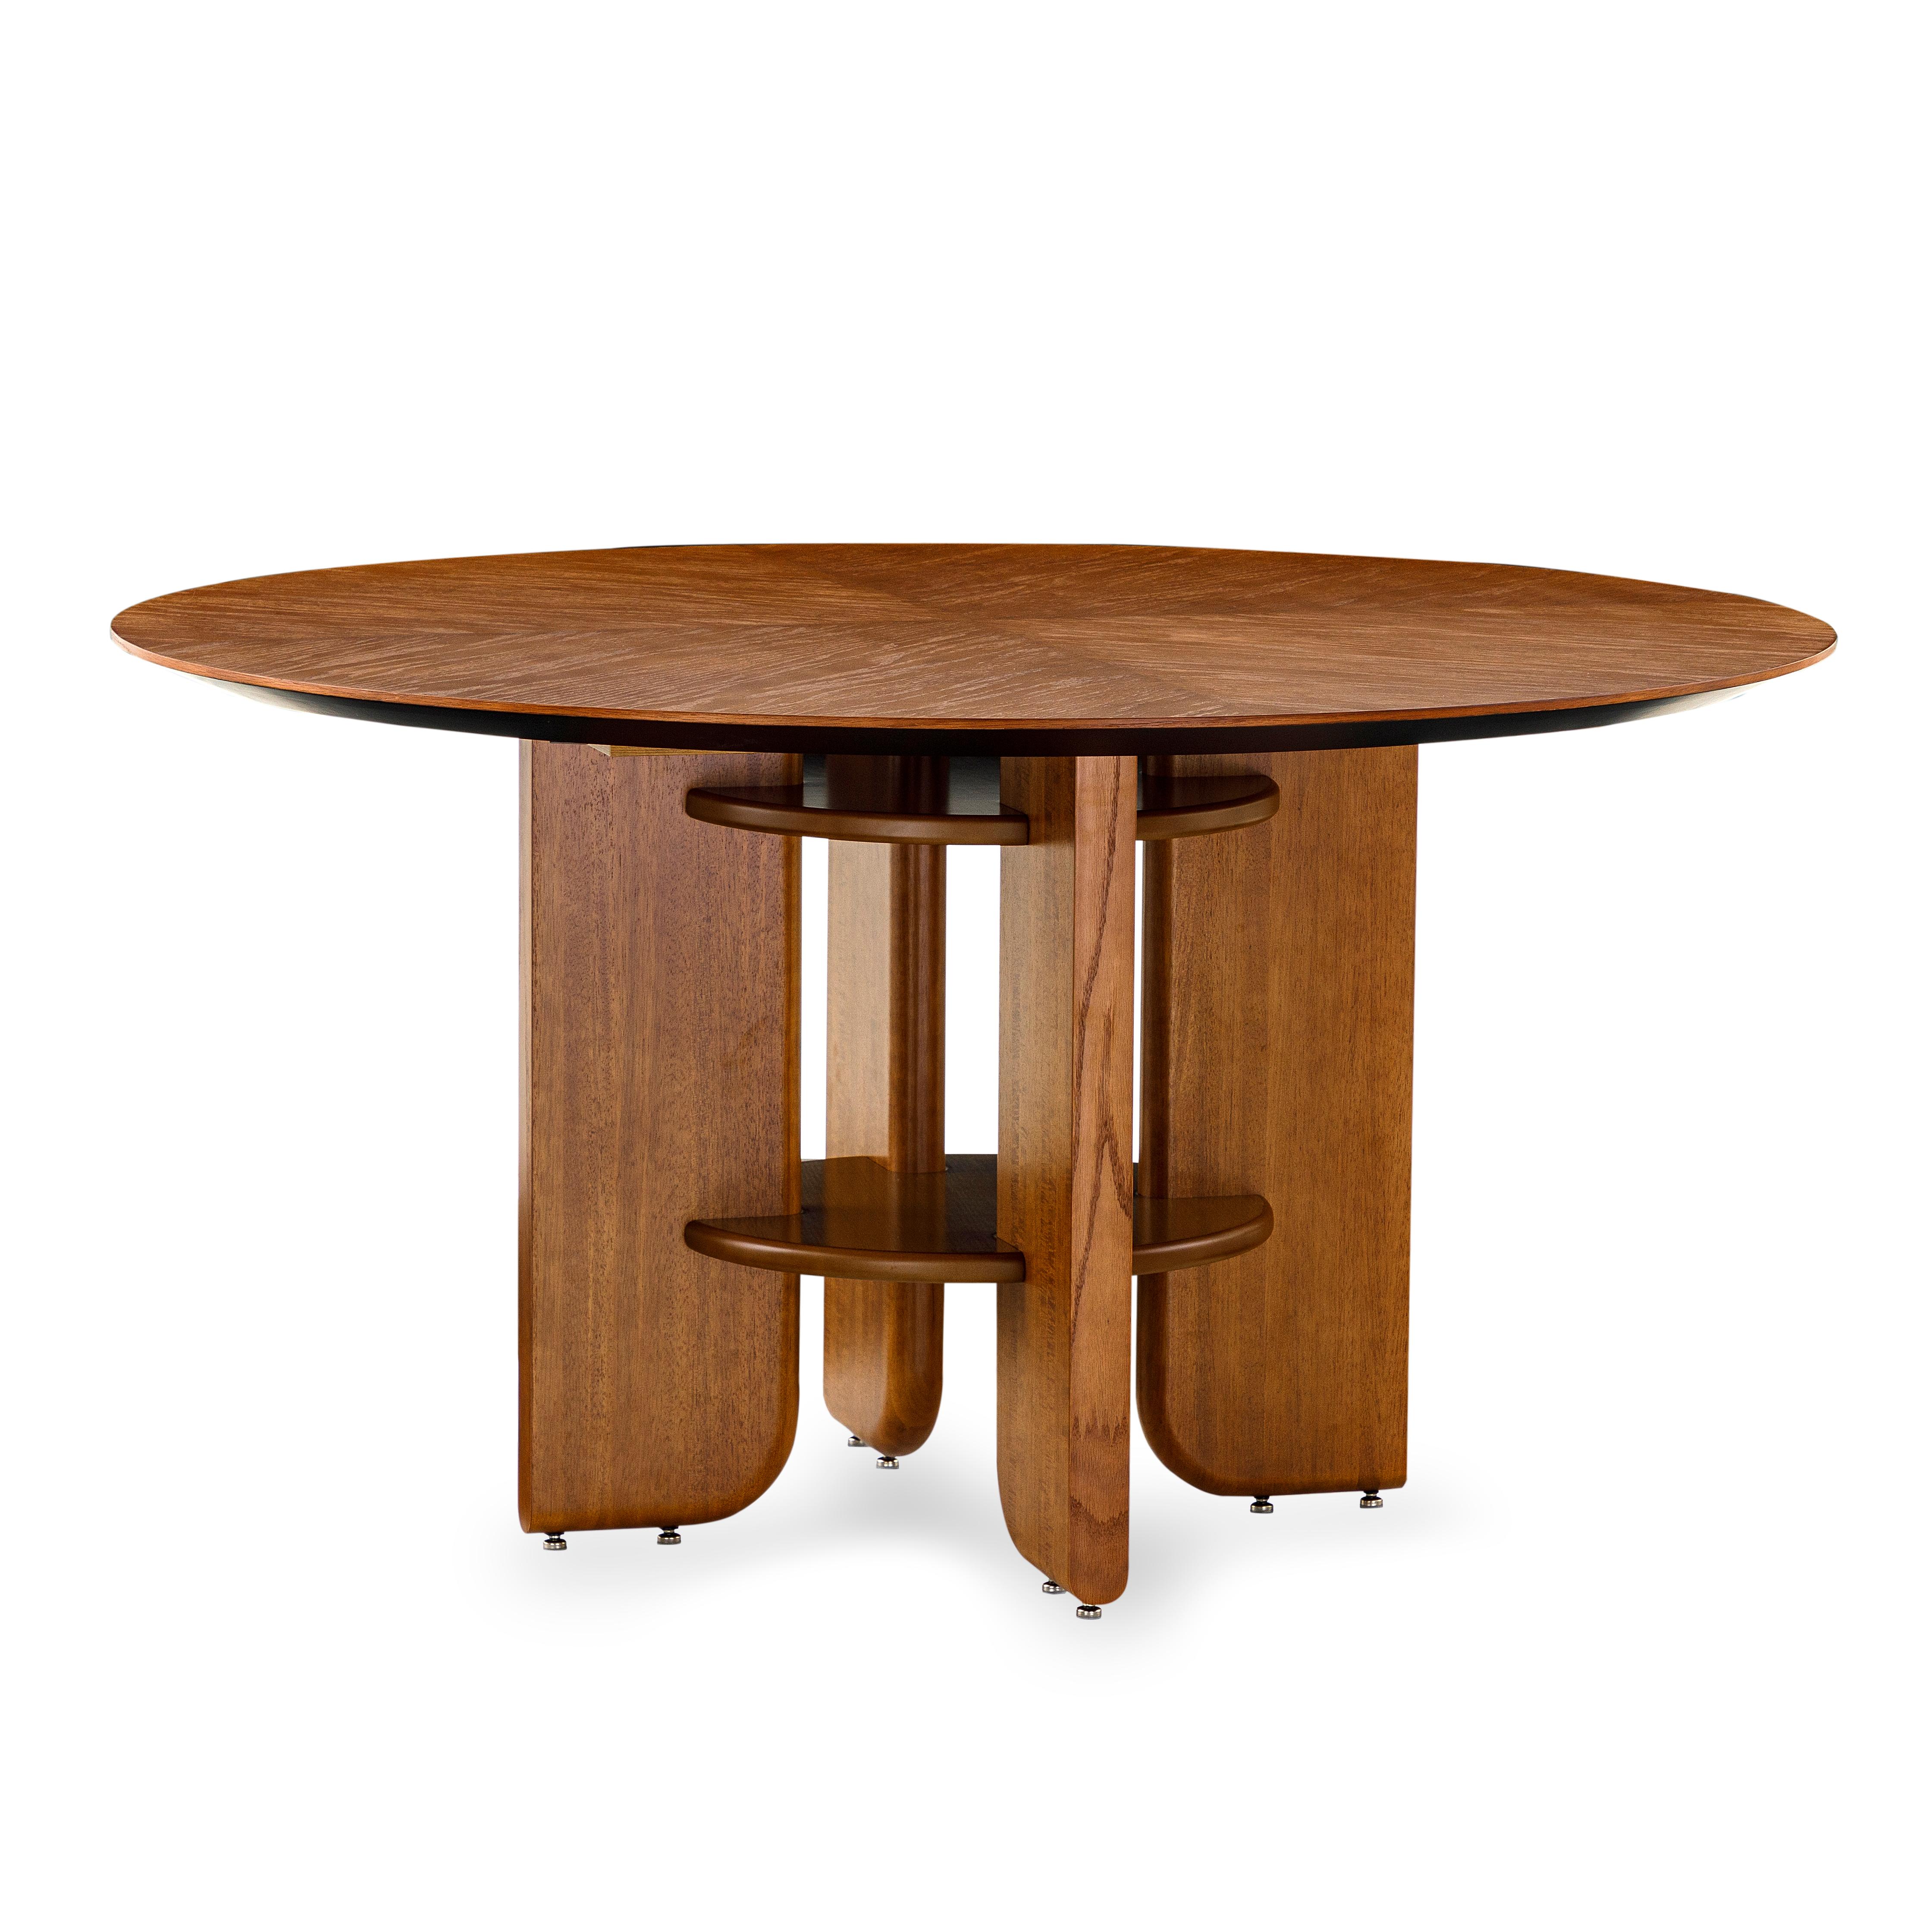 This round dining table in an almond oak veneered top finish with oak wood legs is the perfect table for your house. Every dining space needs a good dining table and the Moon round table is going to be perfect for that space, with an exclusive